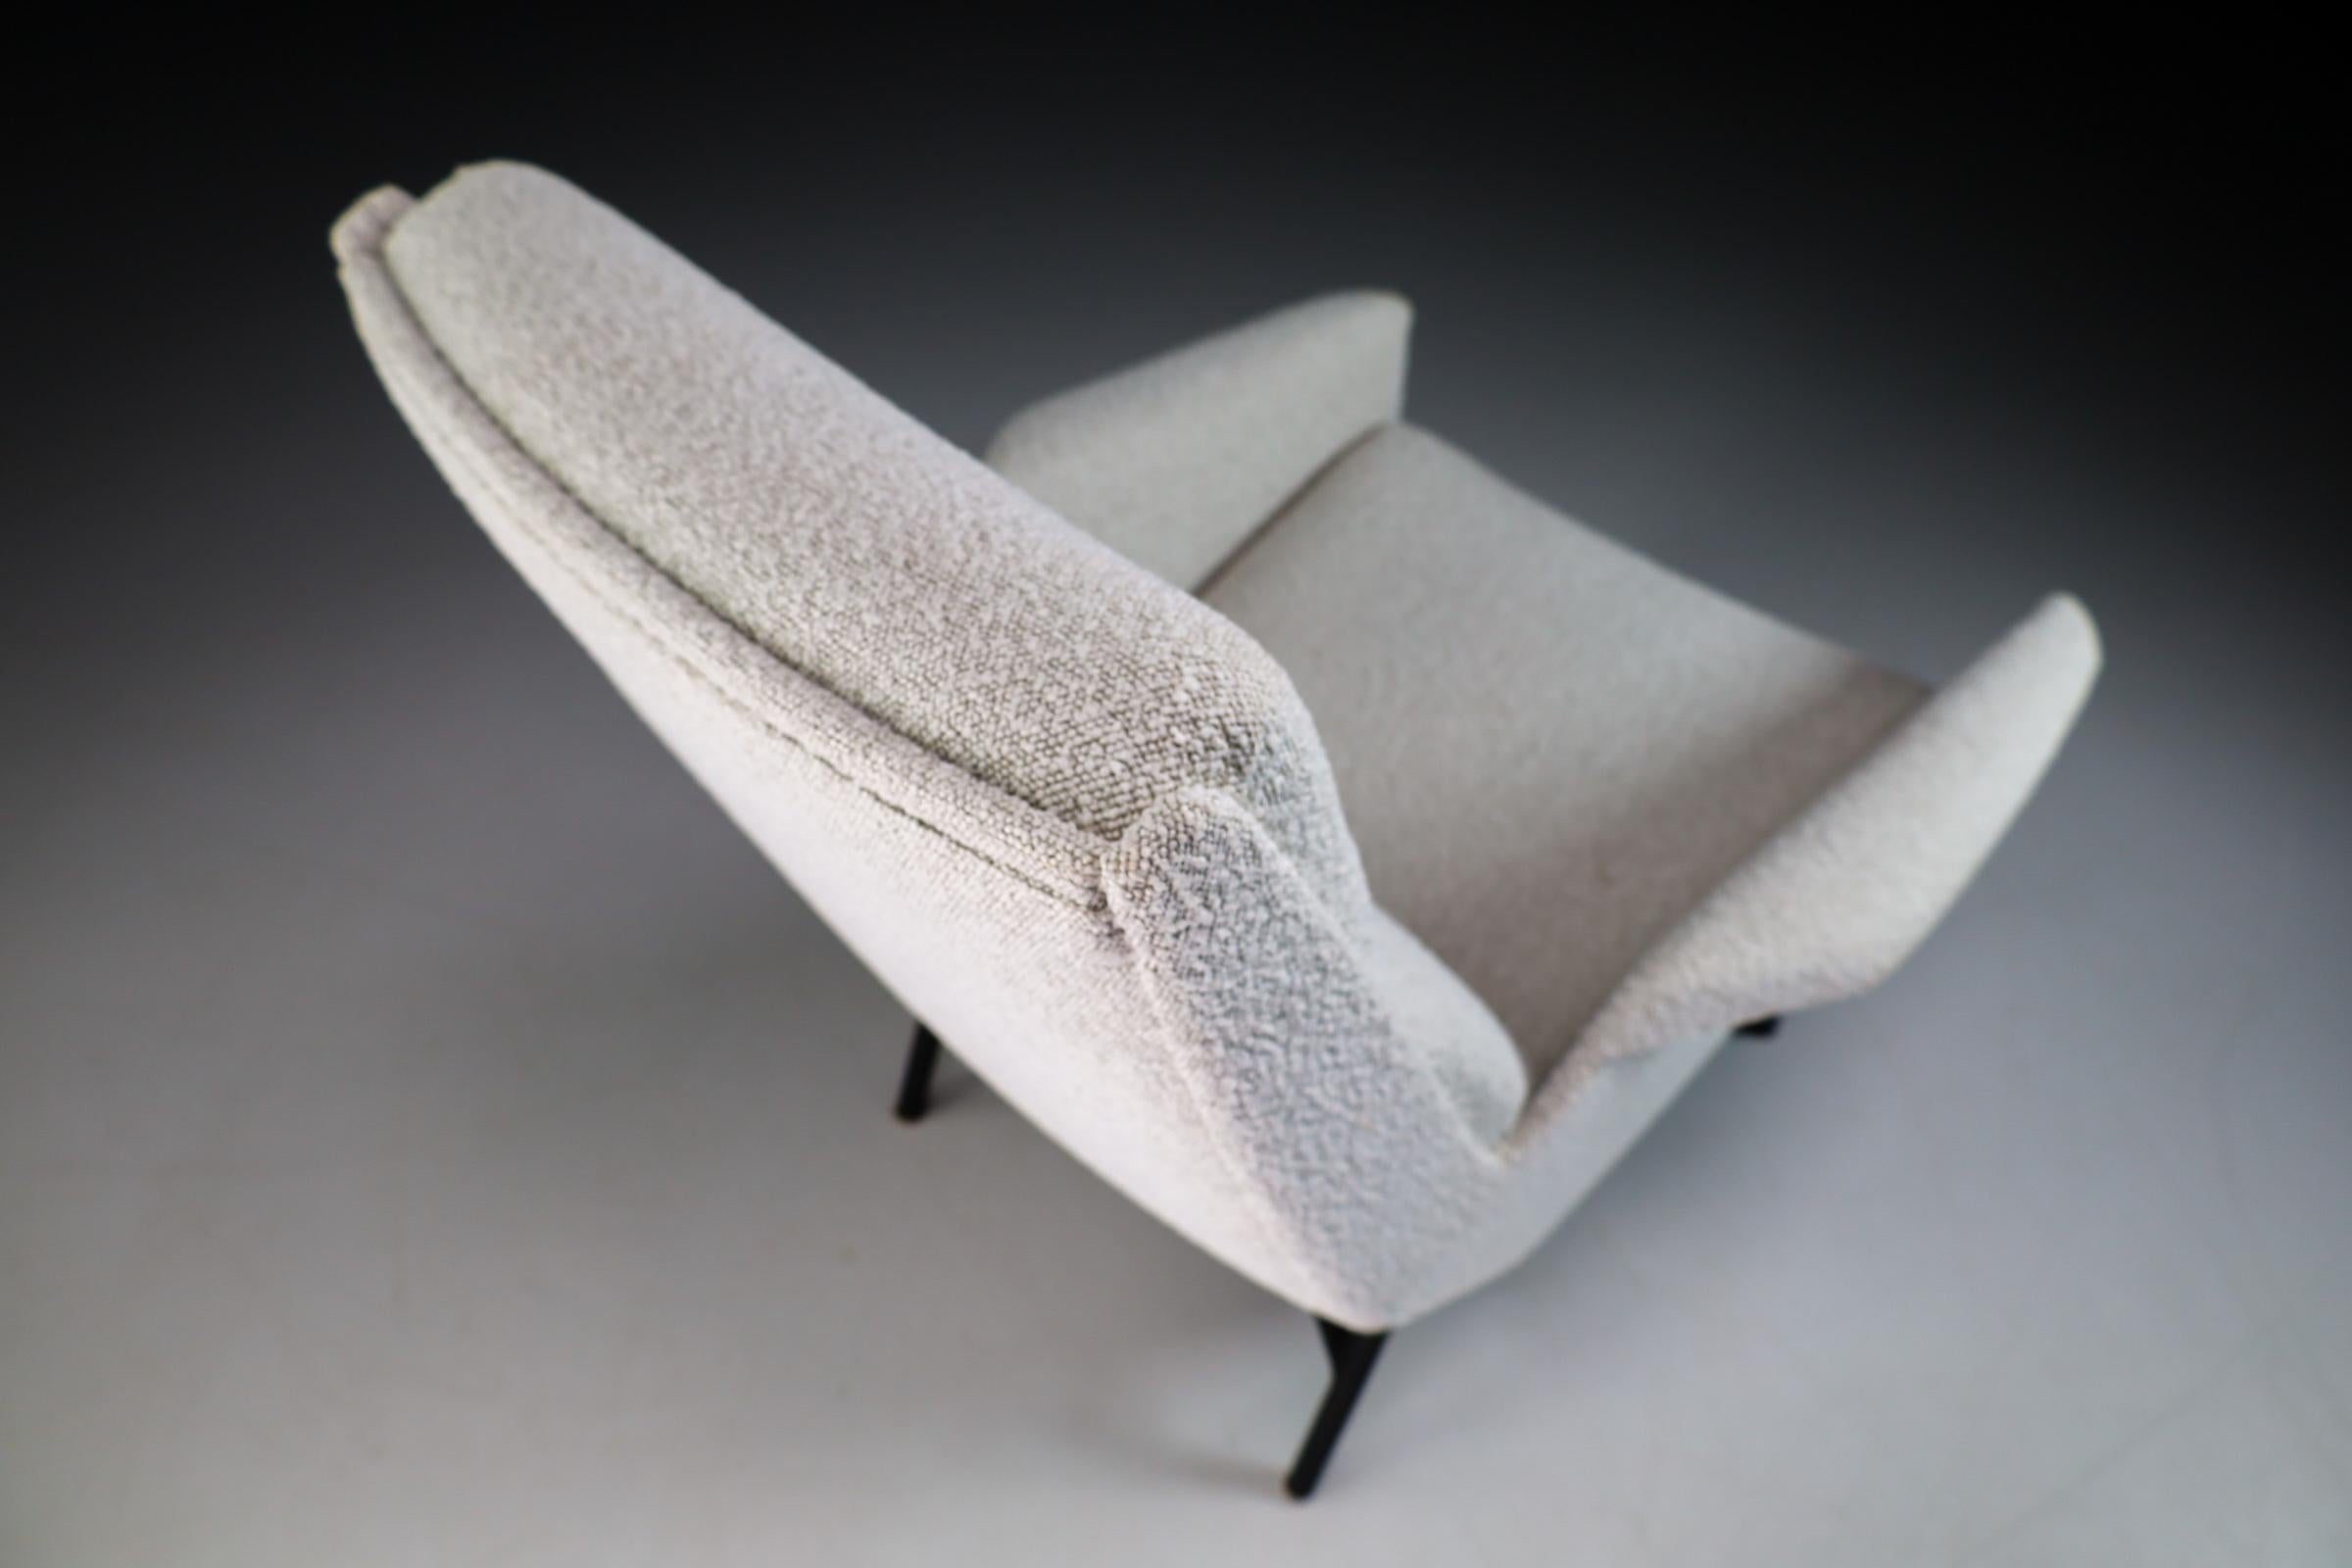 20th Century Midcentury Modern Lounge Chair in Re Upholstered Boucle Wool by Guy Besnard 1959 For Sale